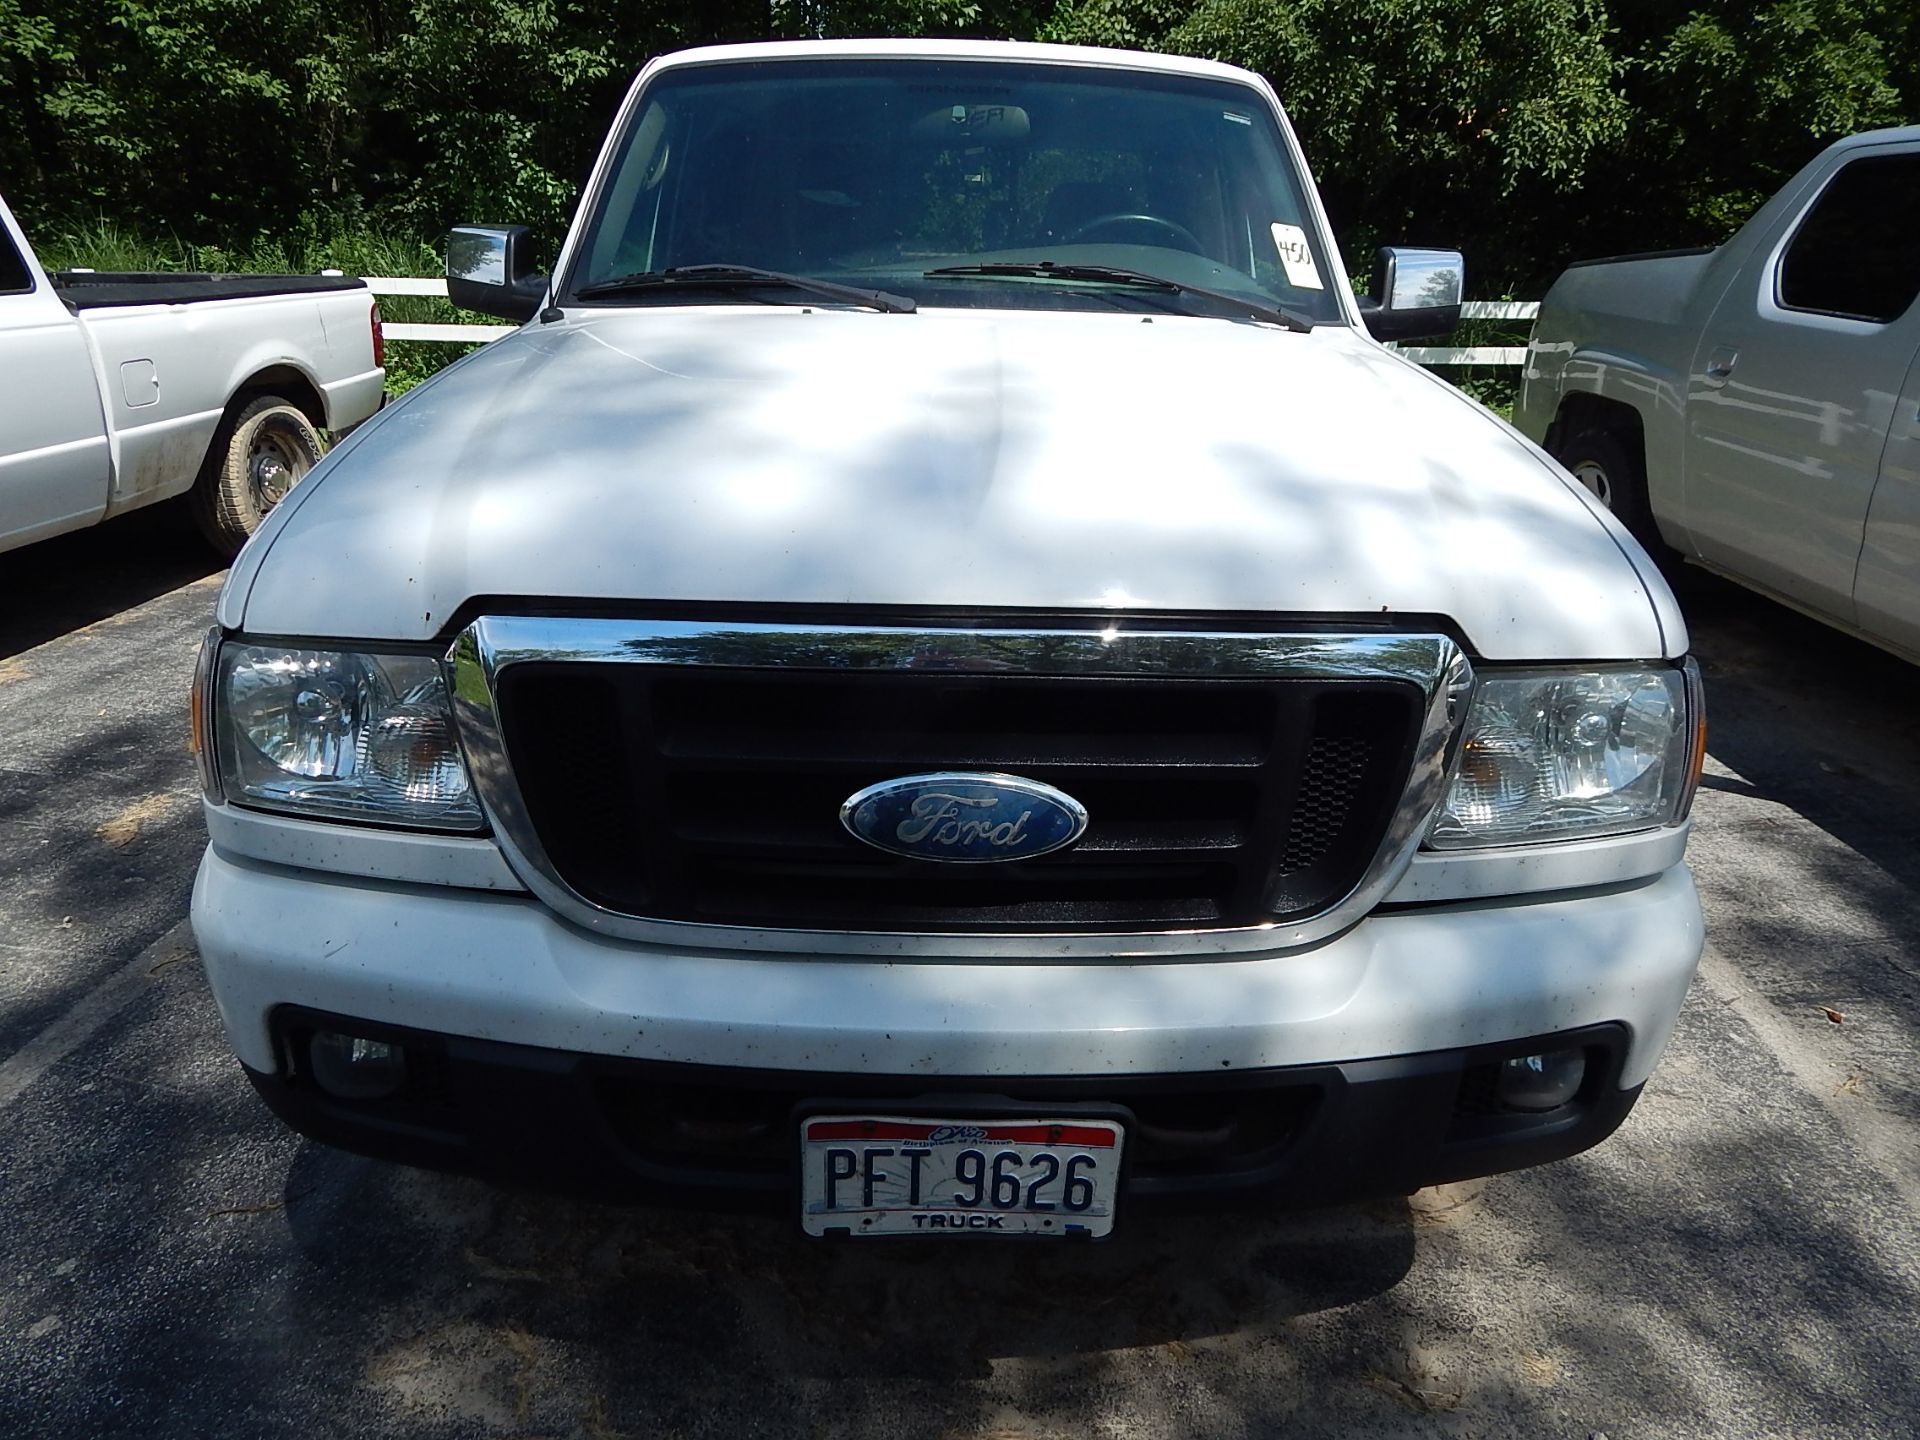 2006 Ford Ranger XLT Pick-Up, VIN 1FTZR15E57PAO1346, Extended Cab, 4WD Automatic, PW, PL, A/C, Am/ - Image 3 of 19